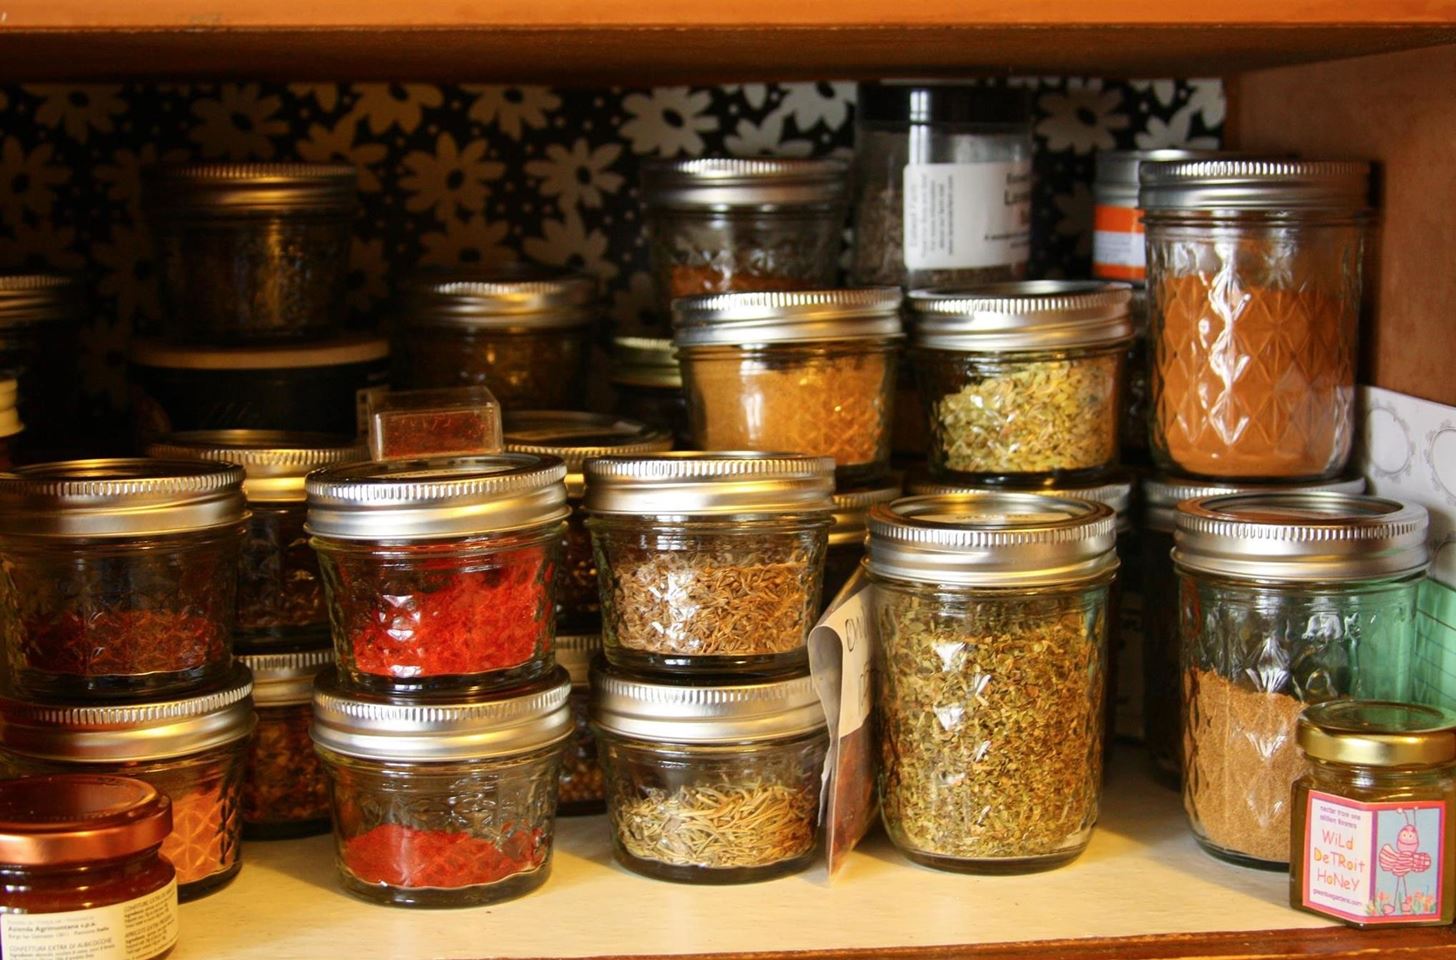 Are Your Herbs & Spices Too Old? Here's How to Check